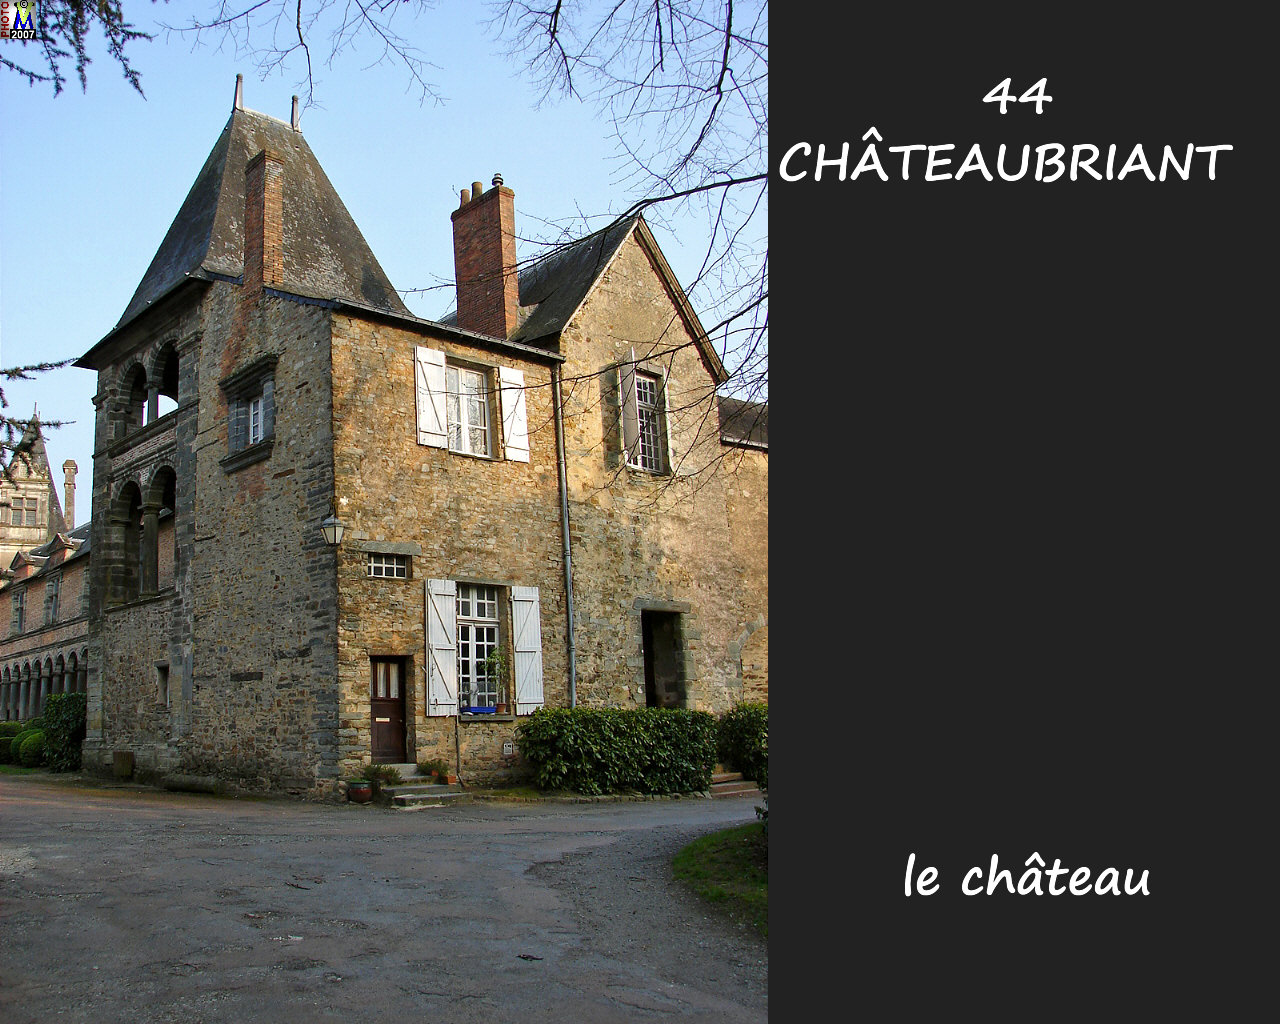 44CHATEAUBRIANT_chateau_240.jpg